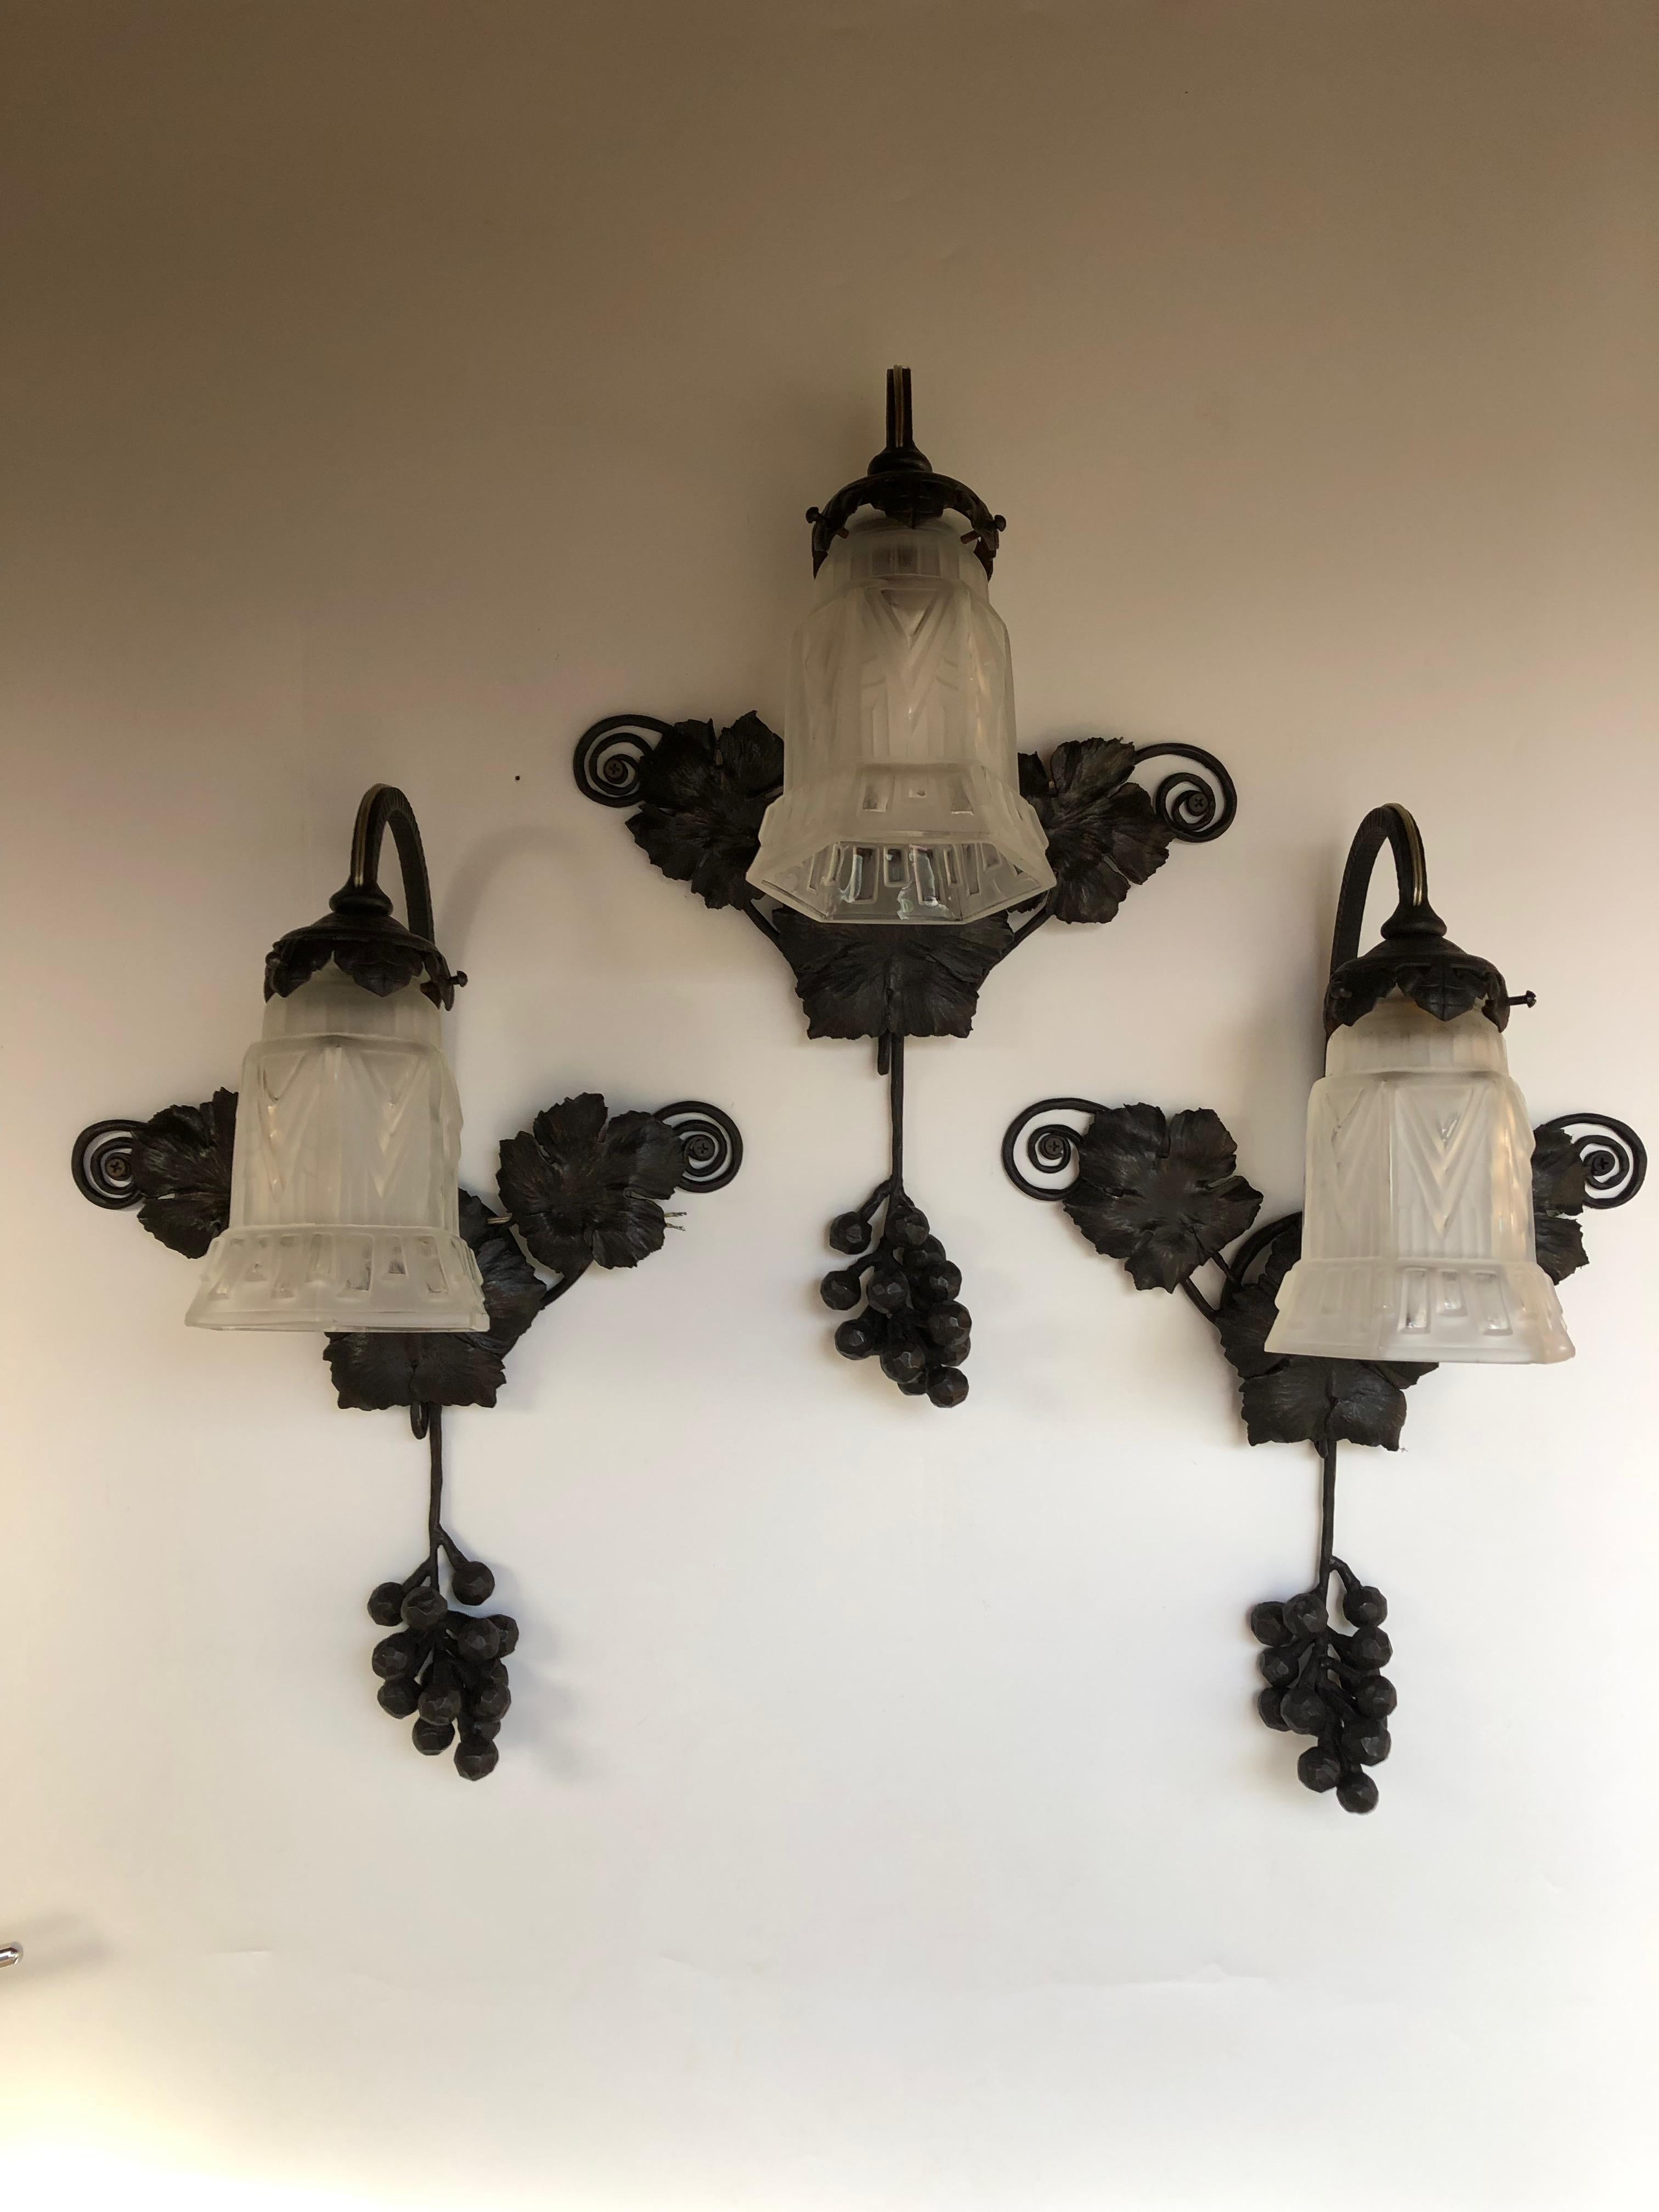 Suite of 3 art deco wall lights around 1930.
Wrought iron frame decorated with vine leaves and bunches of grapes.
Molded glass tulip with geometric decoration.
Wall lights  attributed to Hettier & Vincent.
In perfect state of conservation and